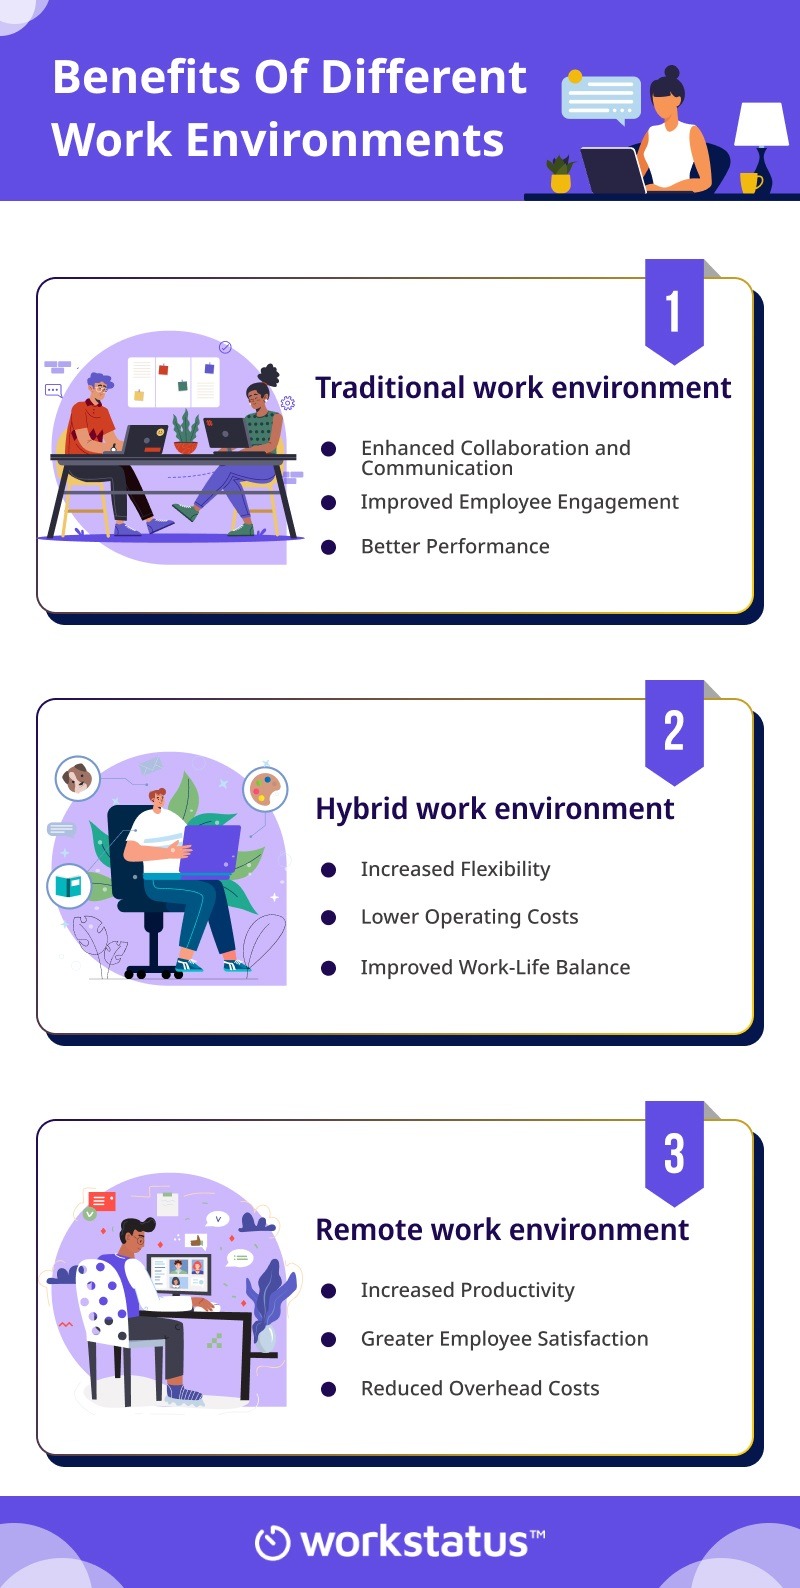 Benefits Of Different Work Environments